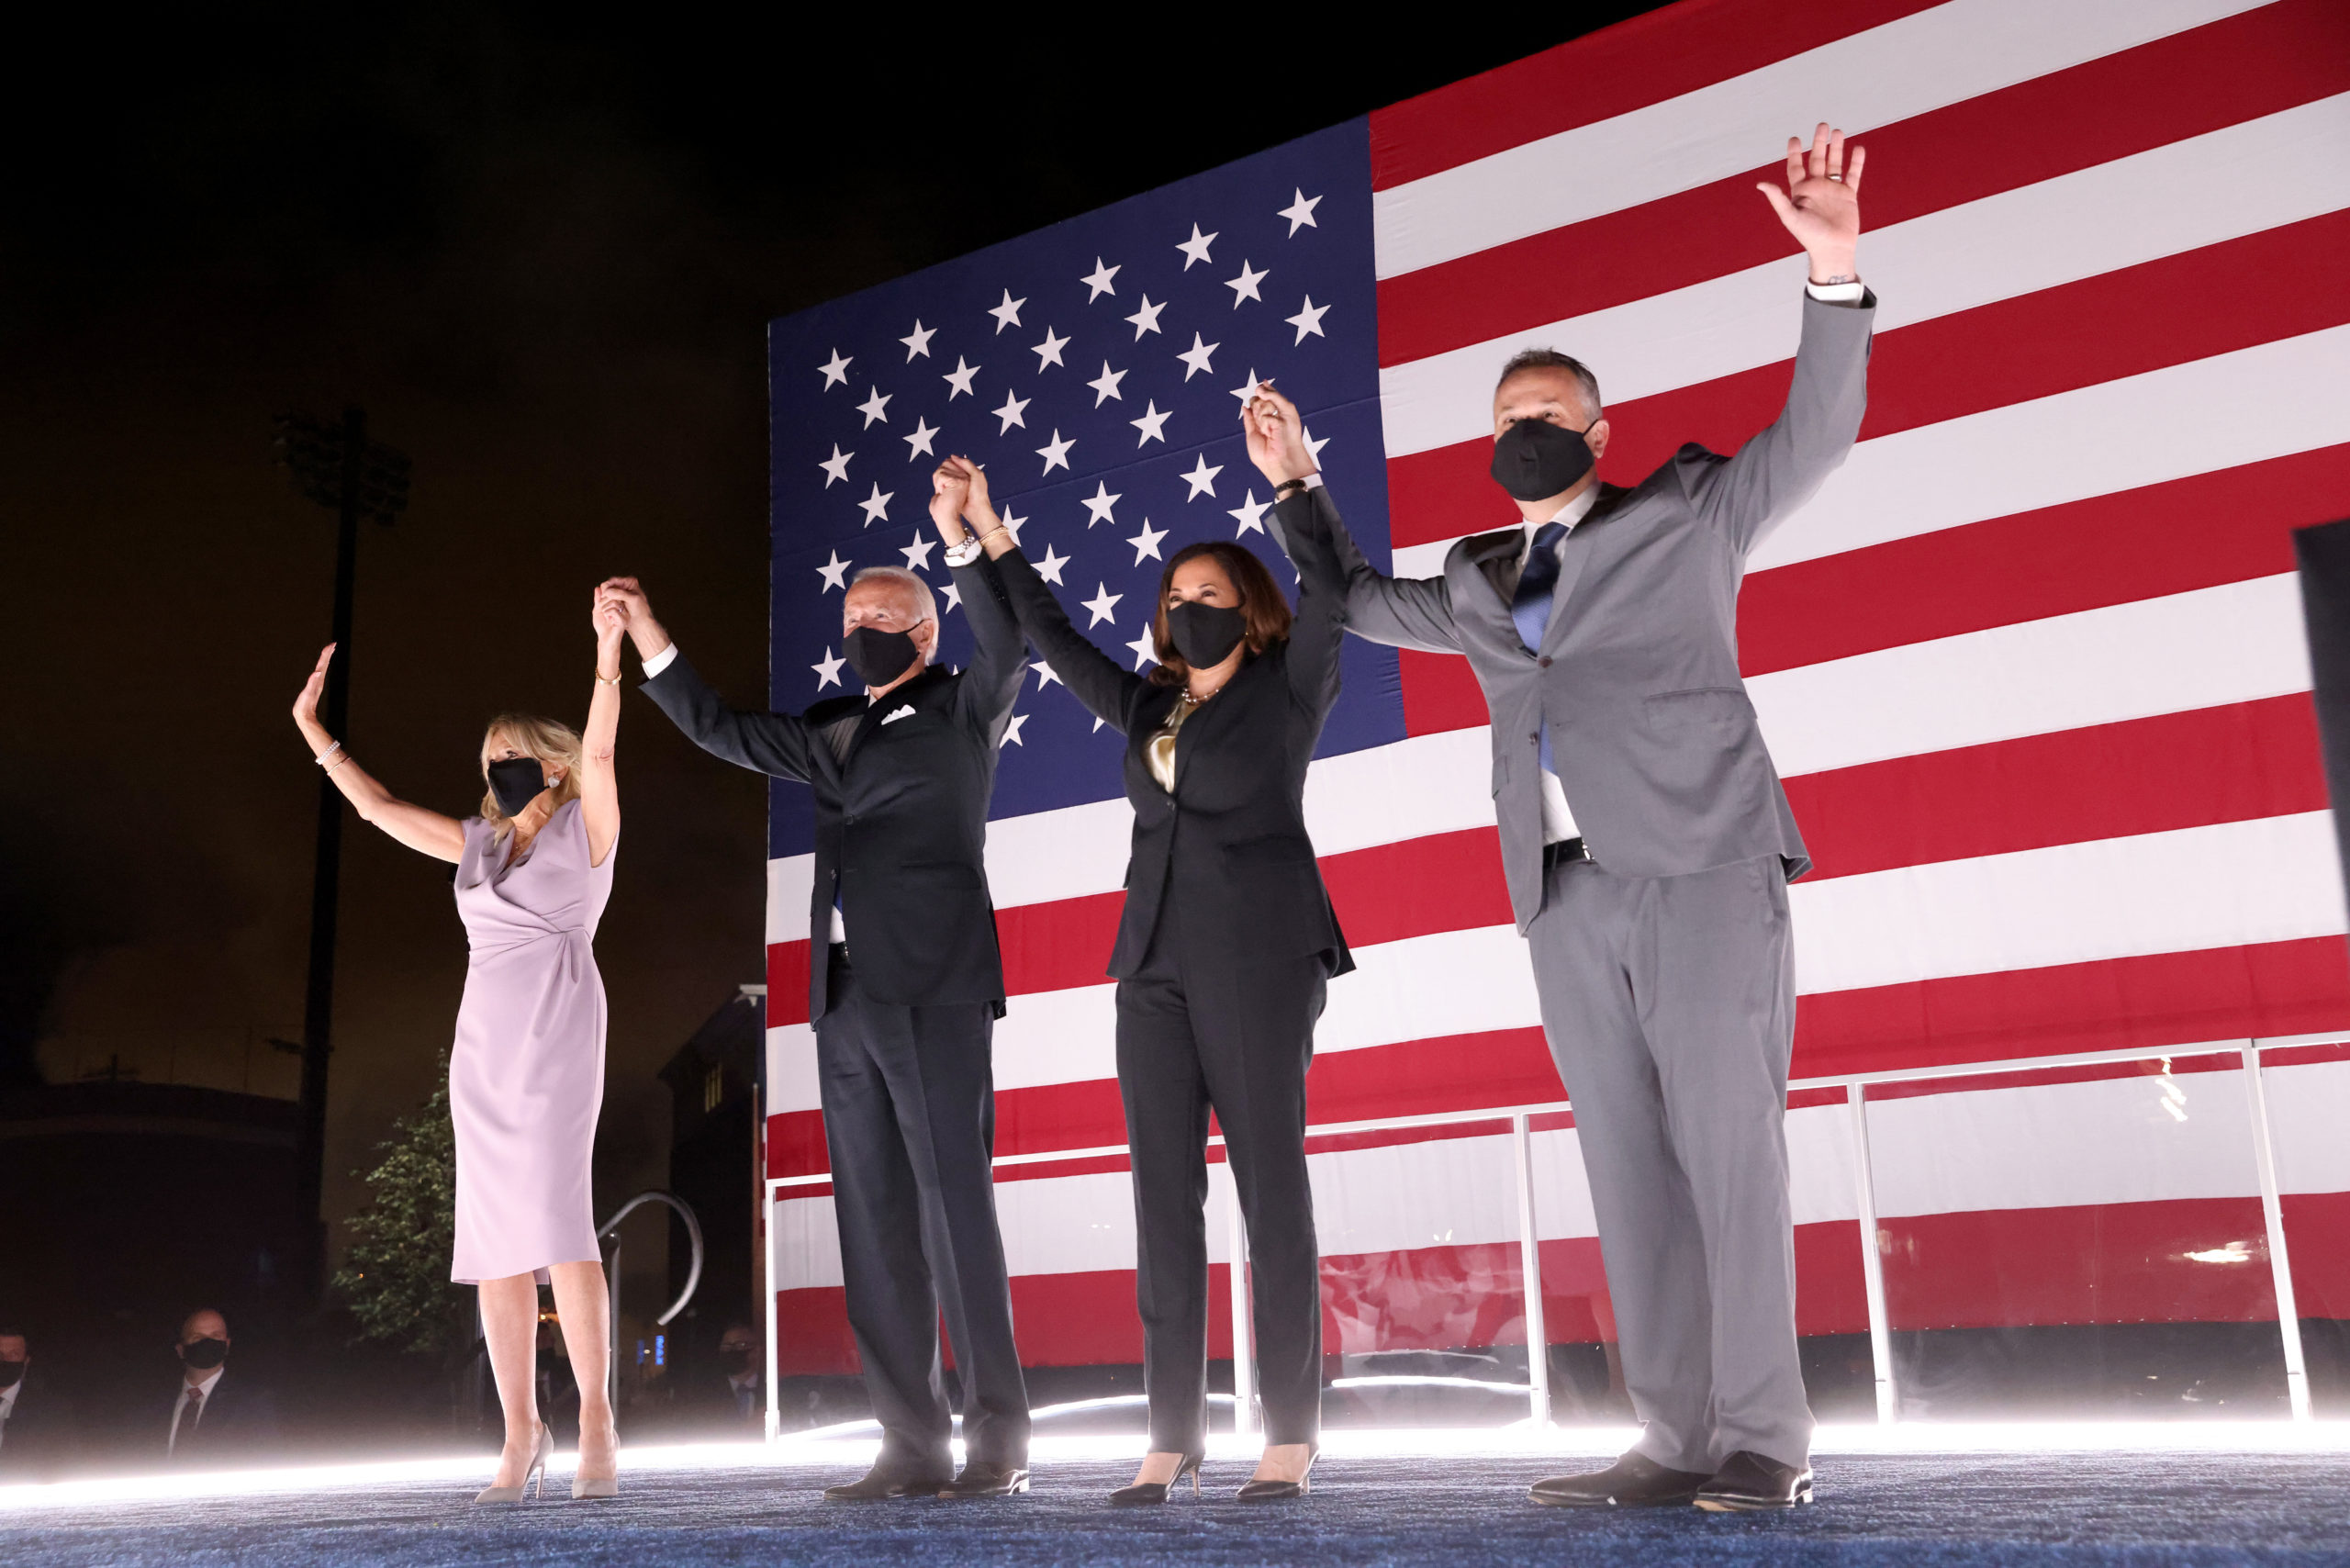 WILMINGTON, DELAWARE - AUGUST 20: Democratic presidential nominee Joe Biden, his wife Dr. Jill Biden, Democratic Vice Presidential nominee Kamala Harris and her husband Douglas Emhoff raise their arms on stage outside the Chase Center after Biden delivered his acceptance speech on the fourth night of the Democratic National Convention from the Chase Center on August 20, 2020 in Wilmington, Delaware. The convention, which was once expected to draw 50,000 people to Milwaukee, Wisconsin, is now taking place virtually due to the coronavirus pandemic. (Photo by Win McNamee/Getty Images)